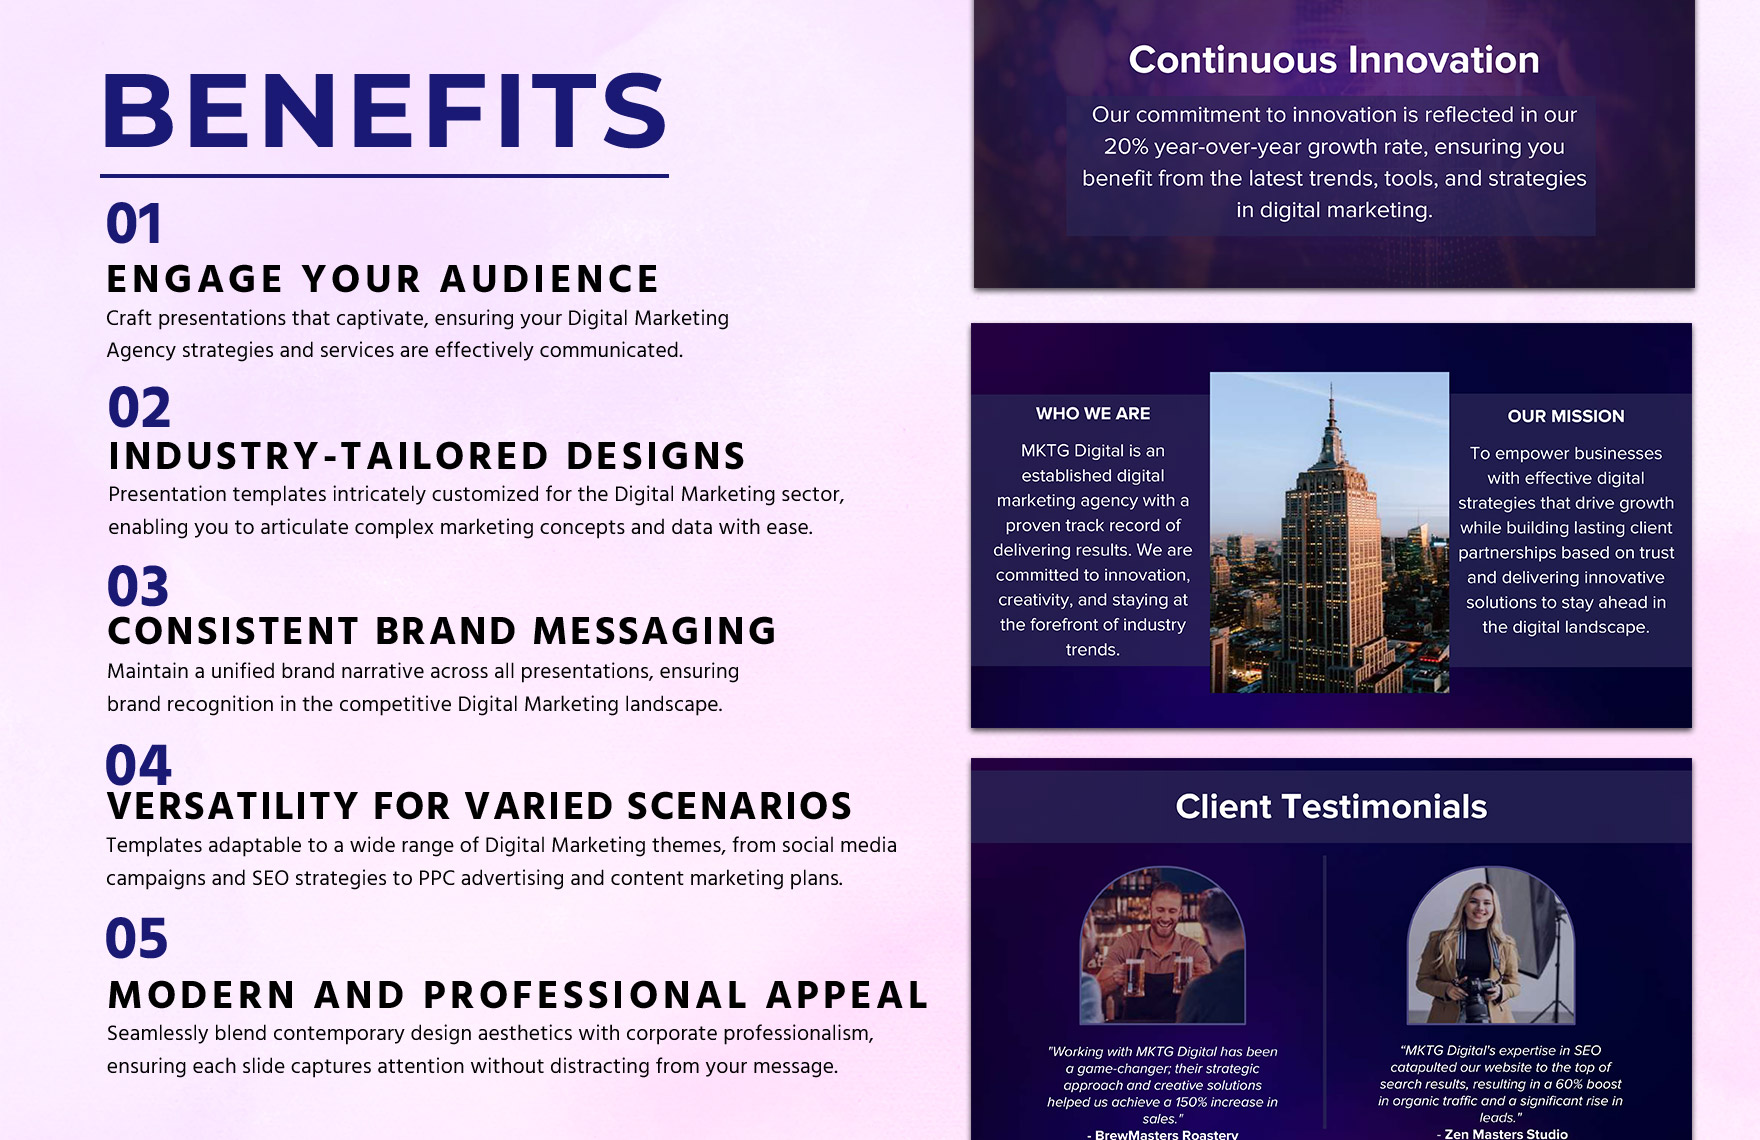 Digital Marketing Agency Pitch Deck for Client Proposals Template